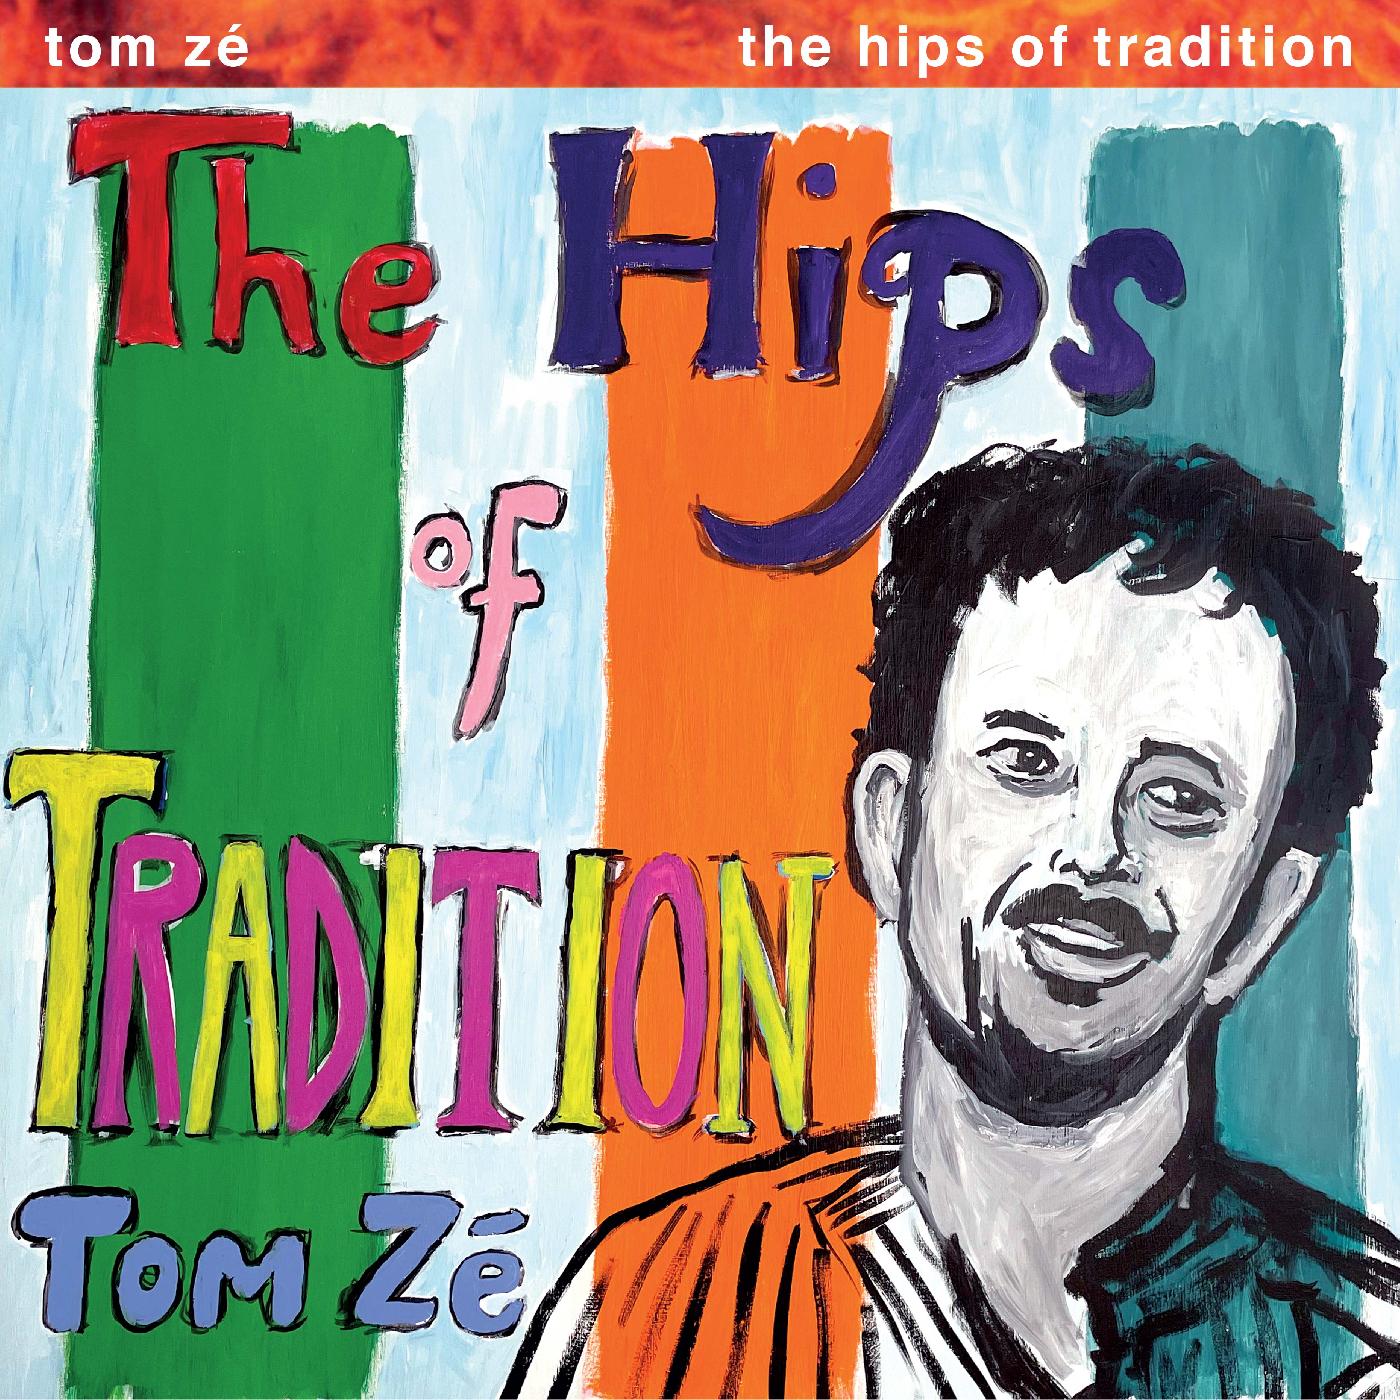 Tom Ze - The Hips Of Tradition ("Amazon" Green Vinyl)